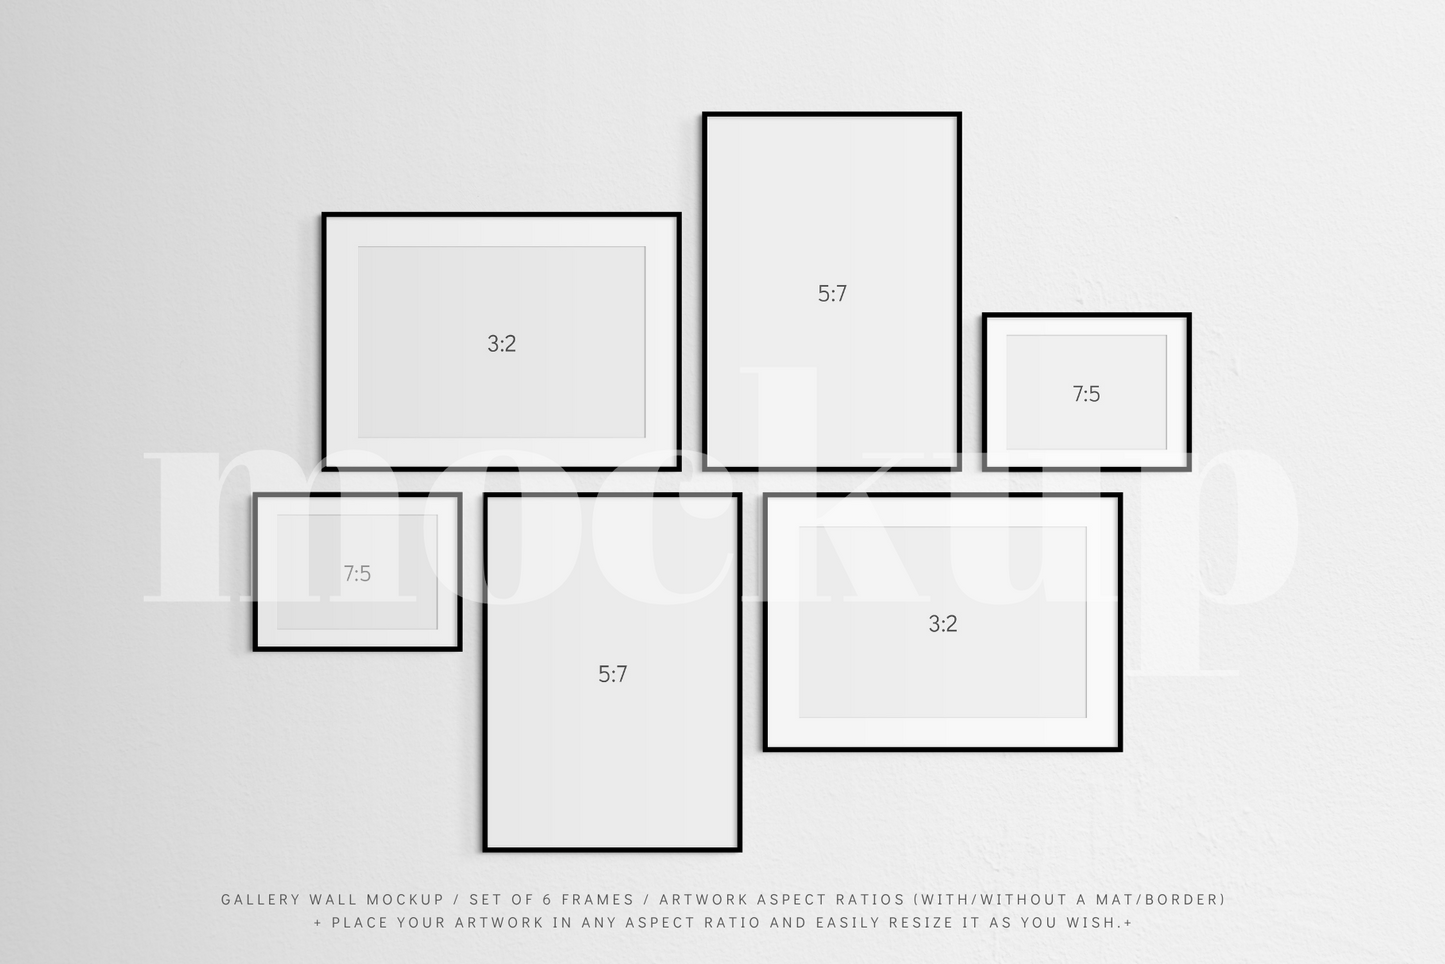 Set of 6 black frames. A customizable and easy-to-use gallery wall frame mockup.